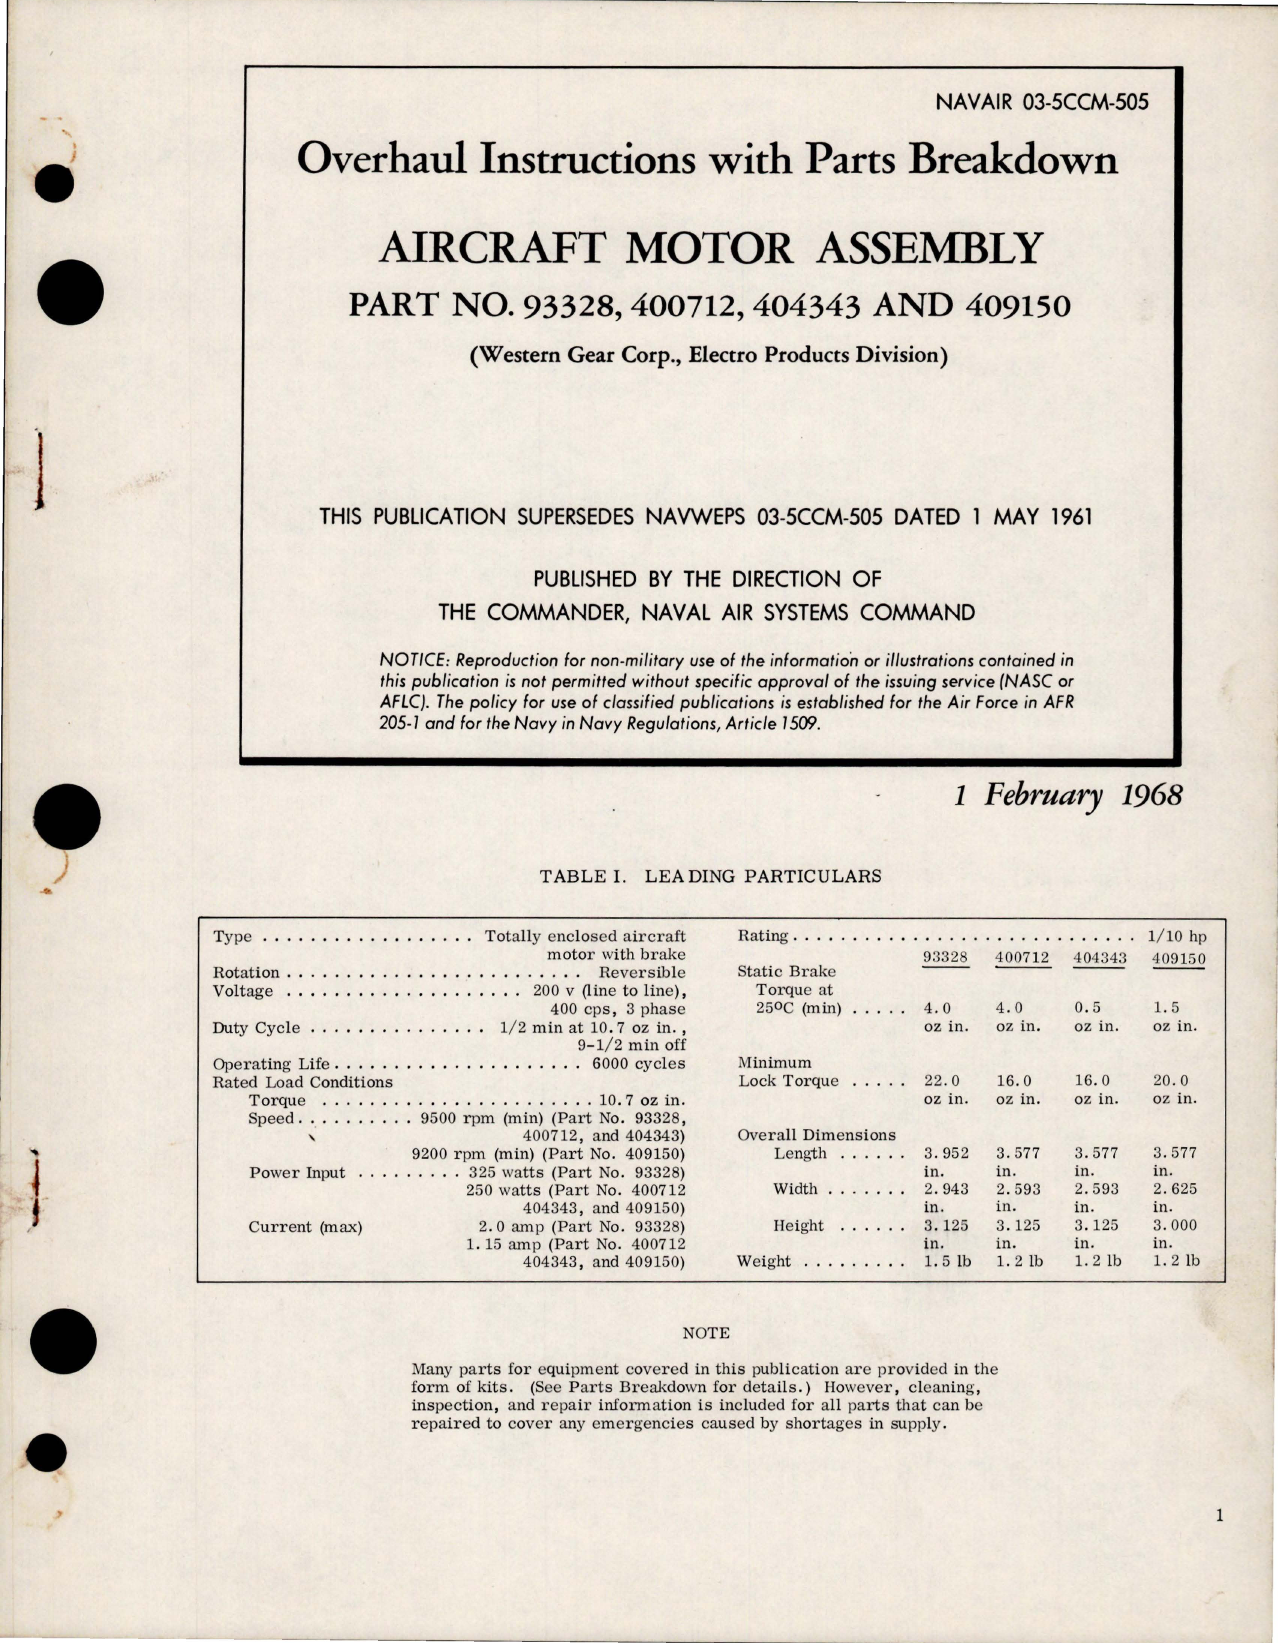 Sample page 1 from AirCorps Library document: Overhaul Instructions with Parts for Aircraft Motor Assembly - Part 93328, 400712, 404343 and 409150 